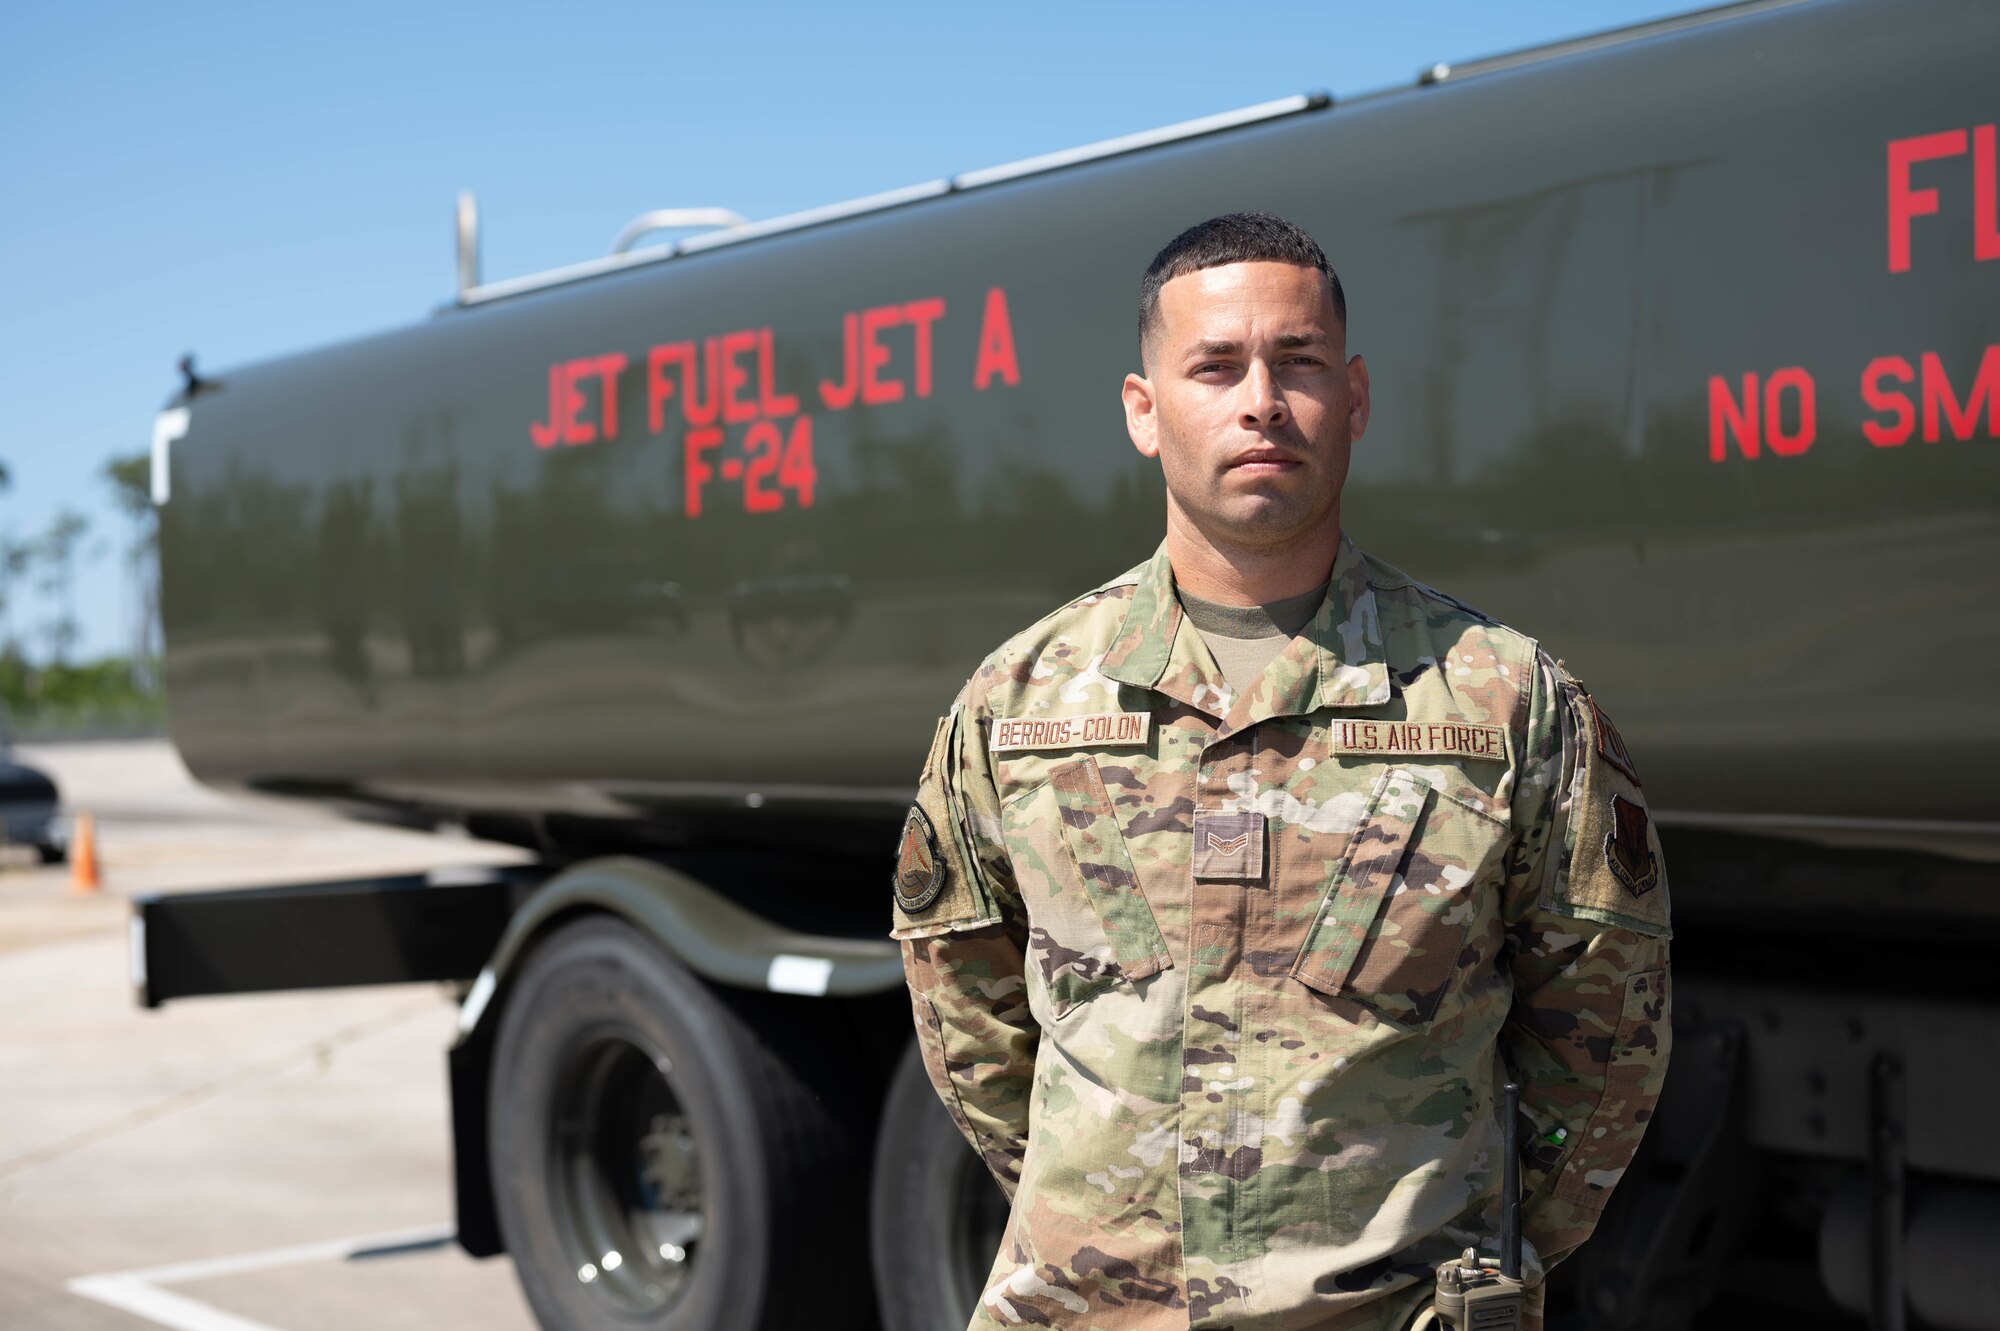 An Airman poses for a portrait in front of a fuels distribution truck